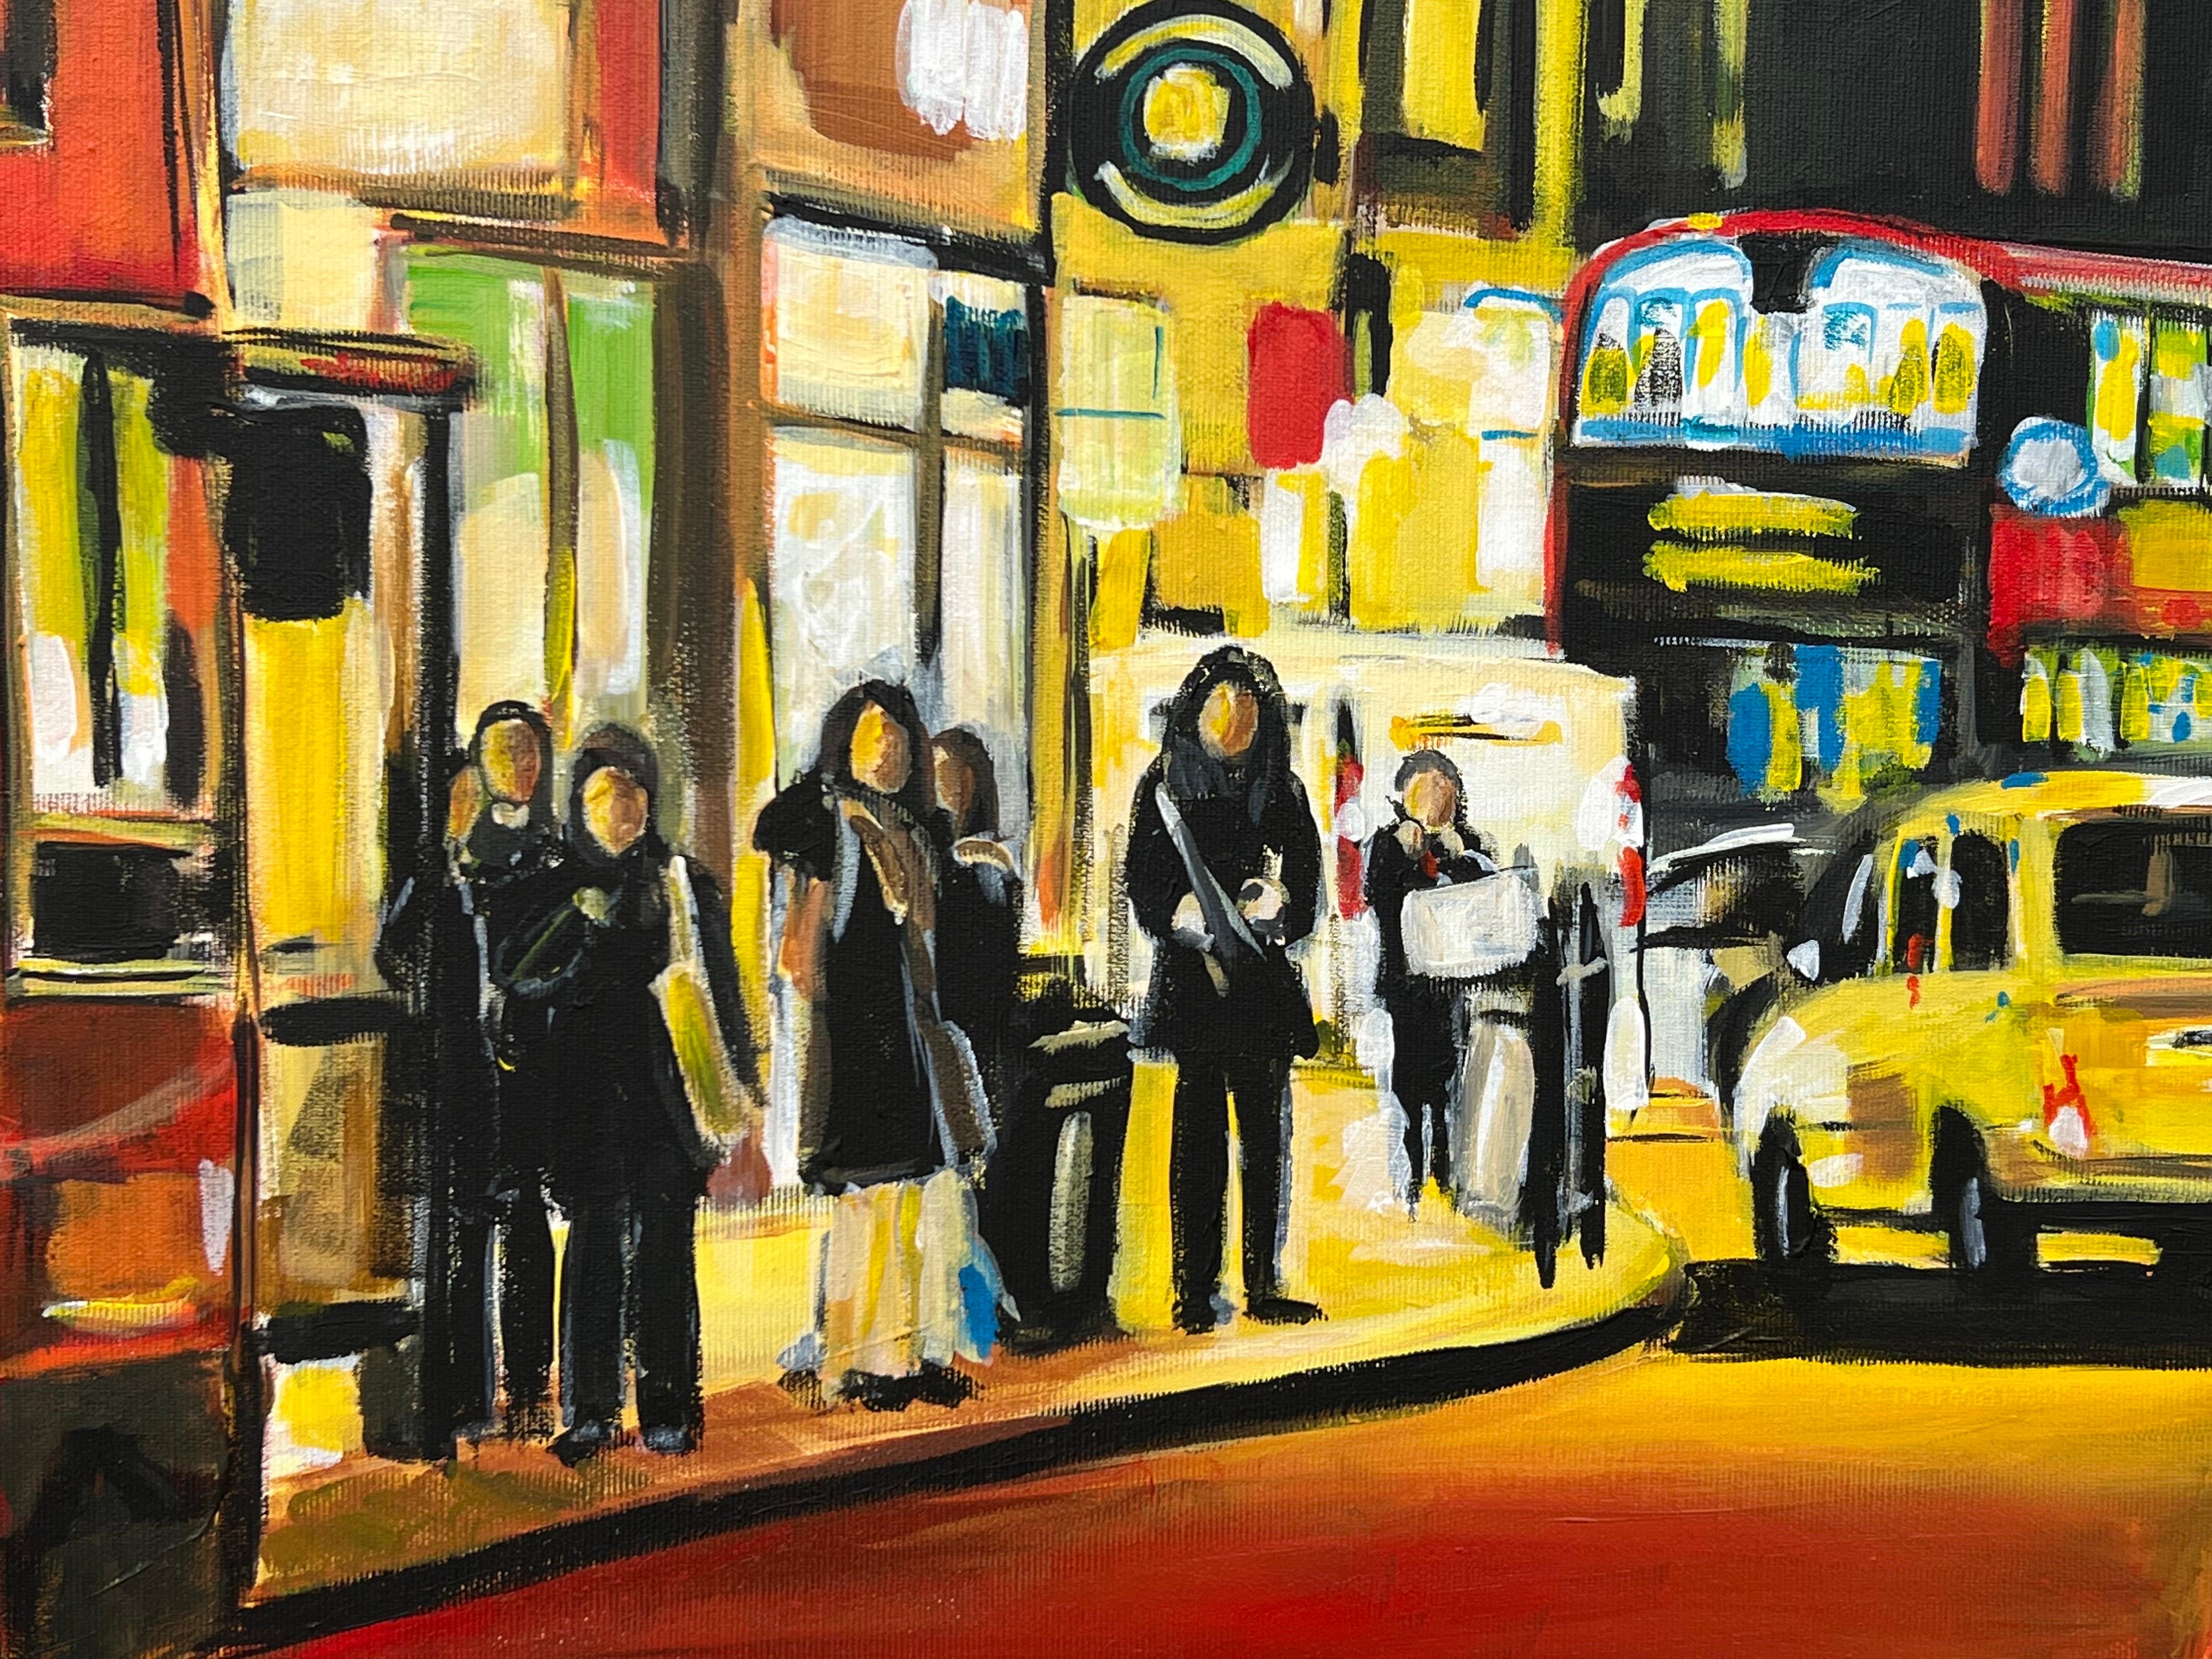 Painting of Figures at London Bus Stop in England at Night by Leading Contemporary British Urban Landscape Artist, Angela Wakefield. 

Art measures 24 x 16 inches 
(Unframed) 

Angela Wakefield has twice been on the front cover of ‘Art of England’